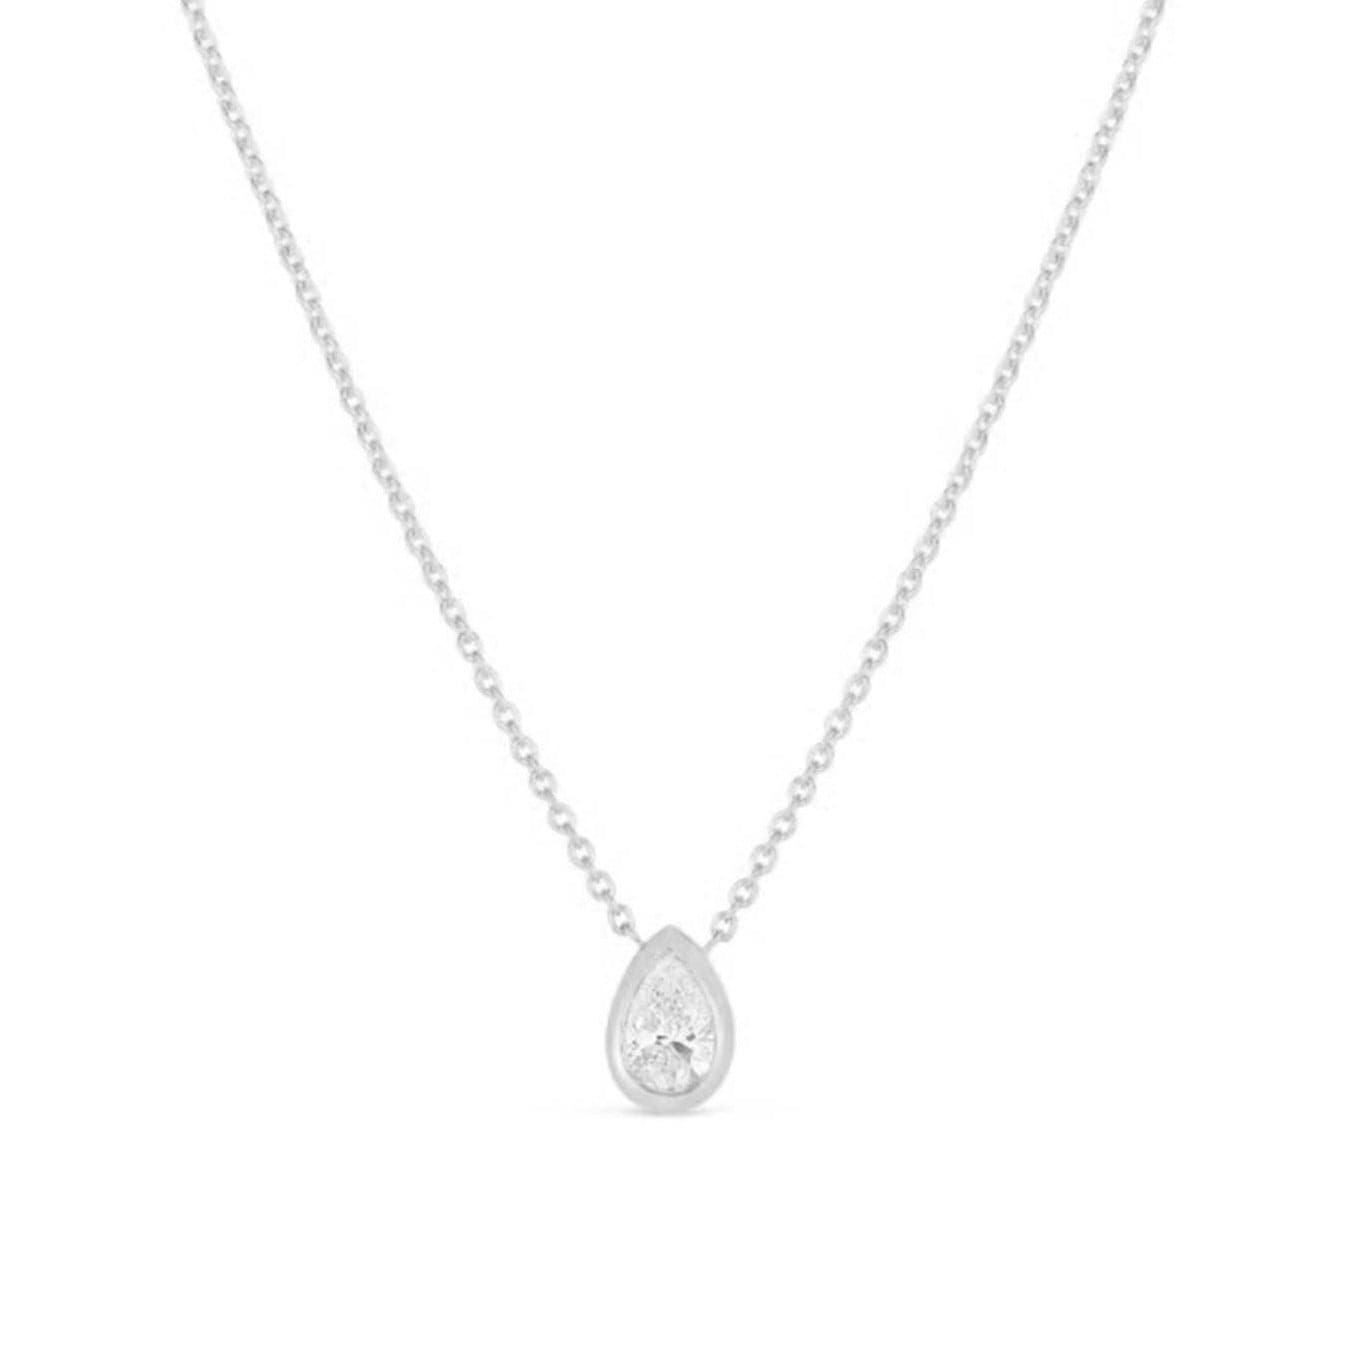 Roberto Coin Necklaces and Pendants 18K White Gold Pear Diamond Necklace